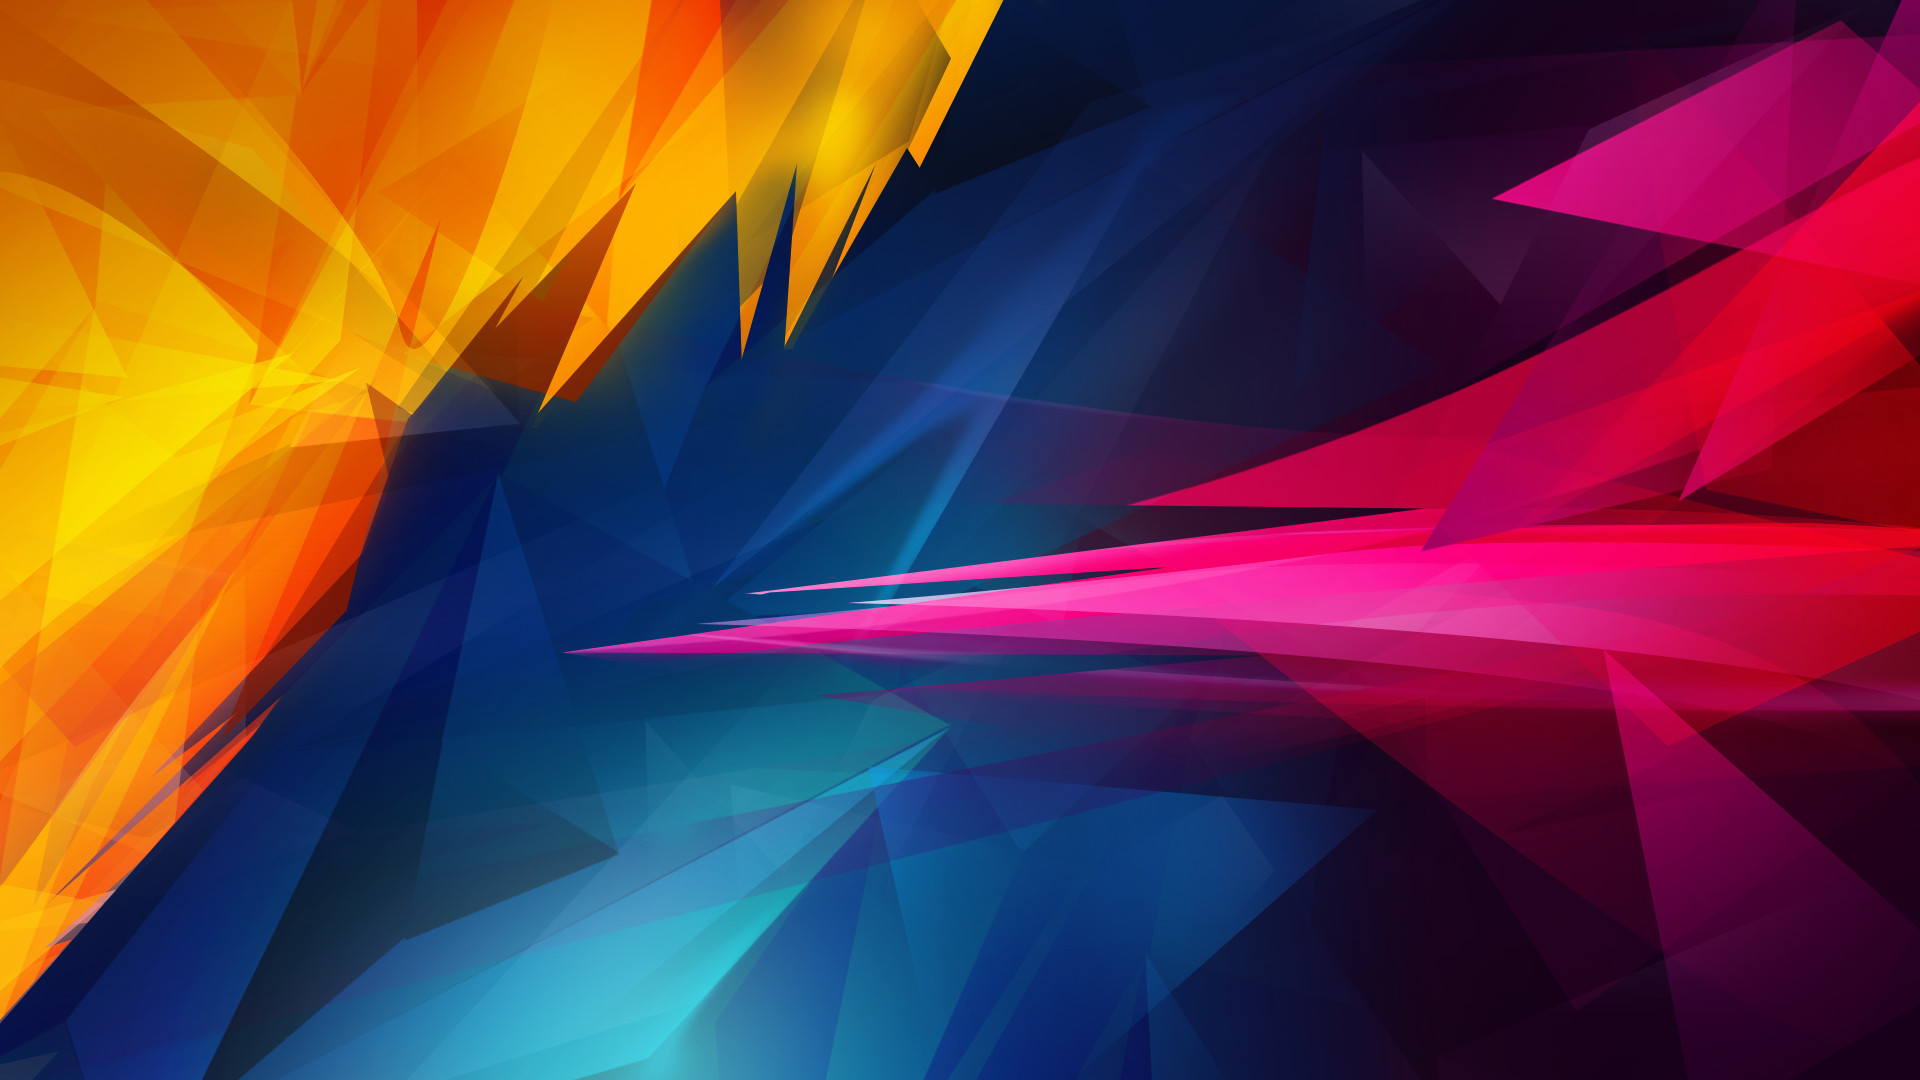 1920x1080  Abstract Wallpaper 1080p by SUPERsaeJANG on DeviantArt